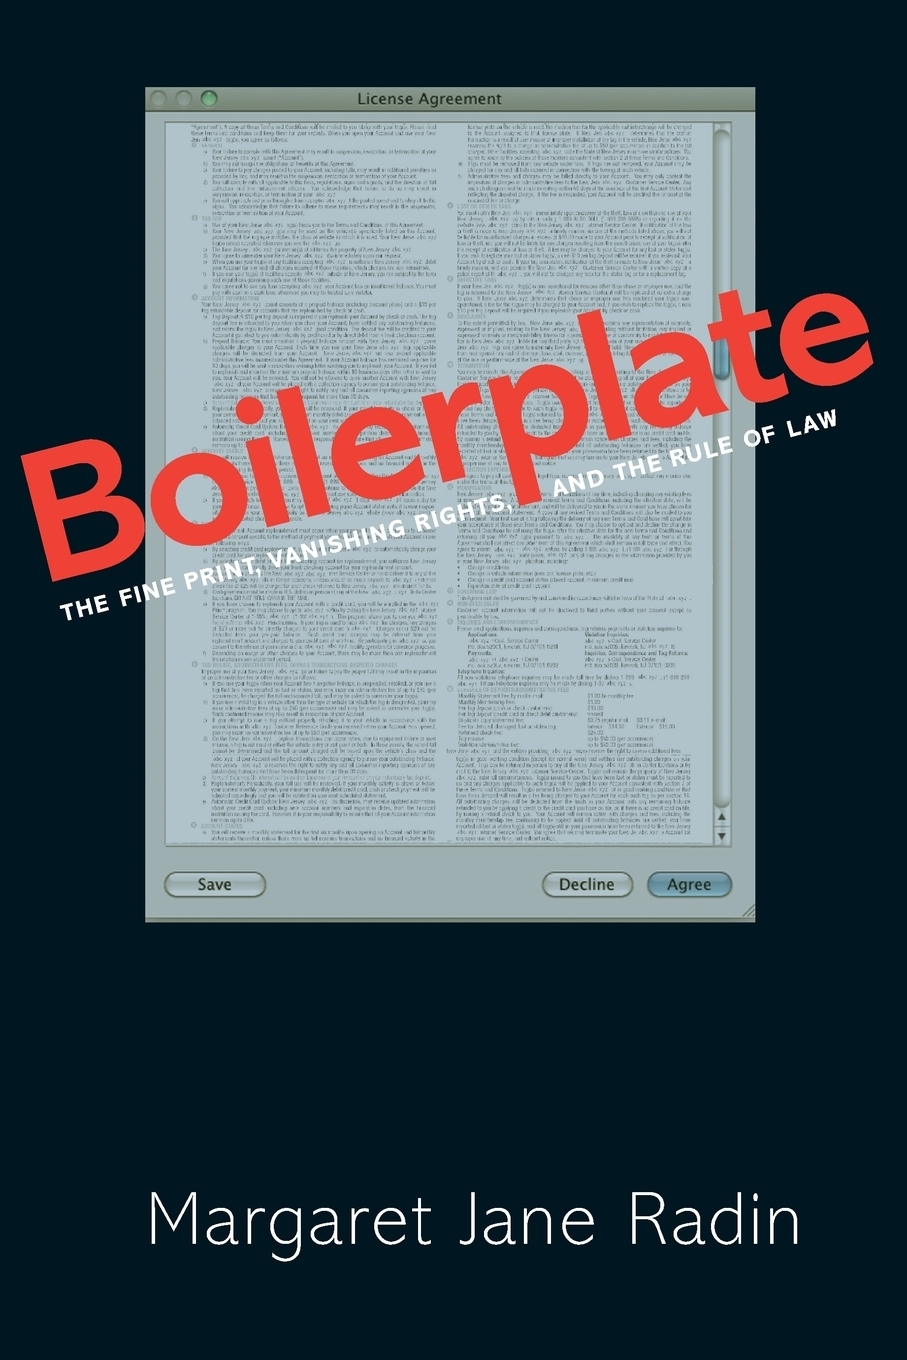 фото Boilerplate. The Fine Print, Vanishing Rights, and the Rule of Law